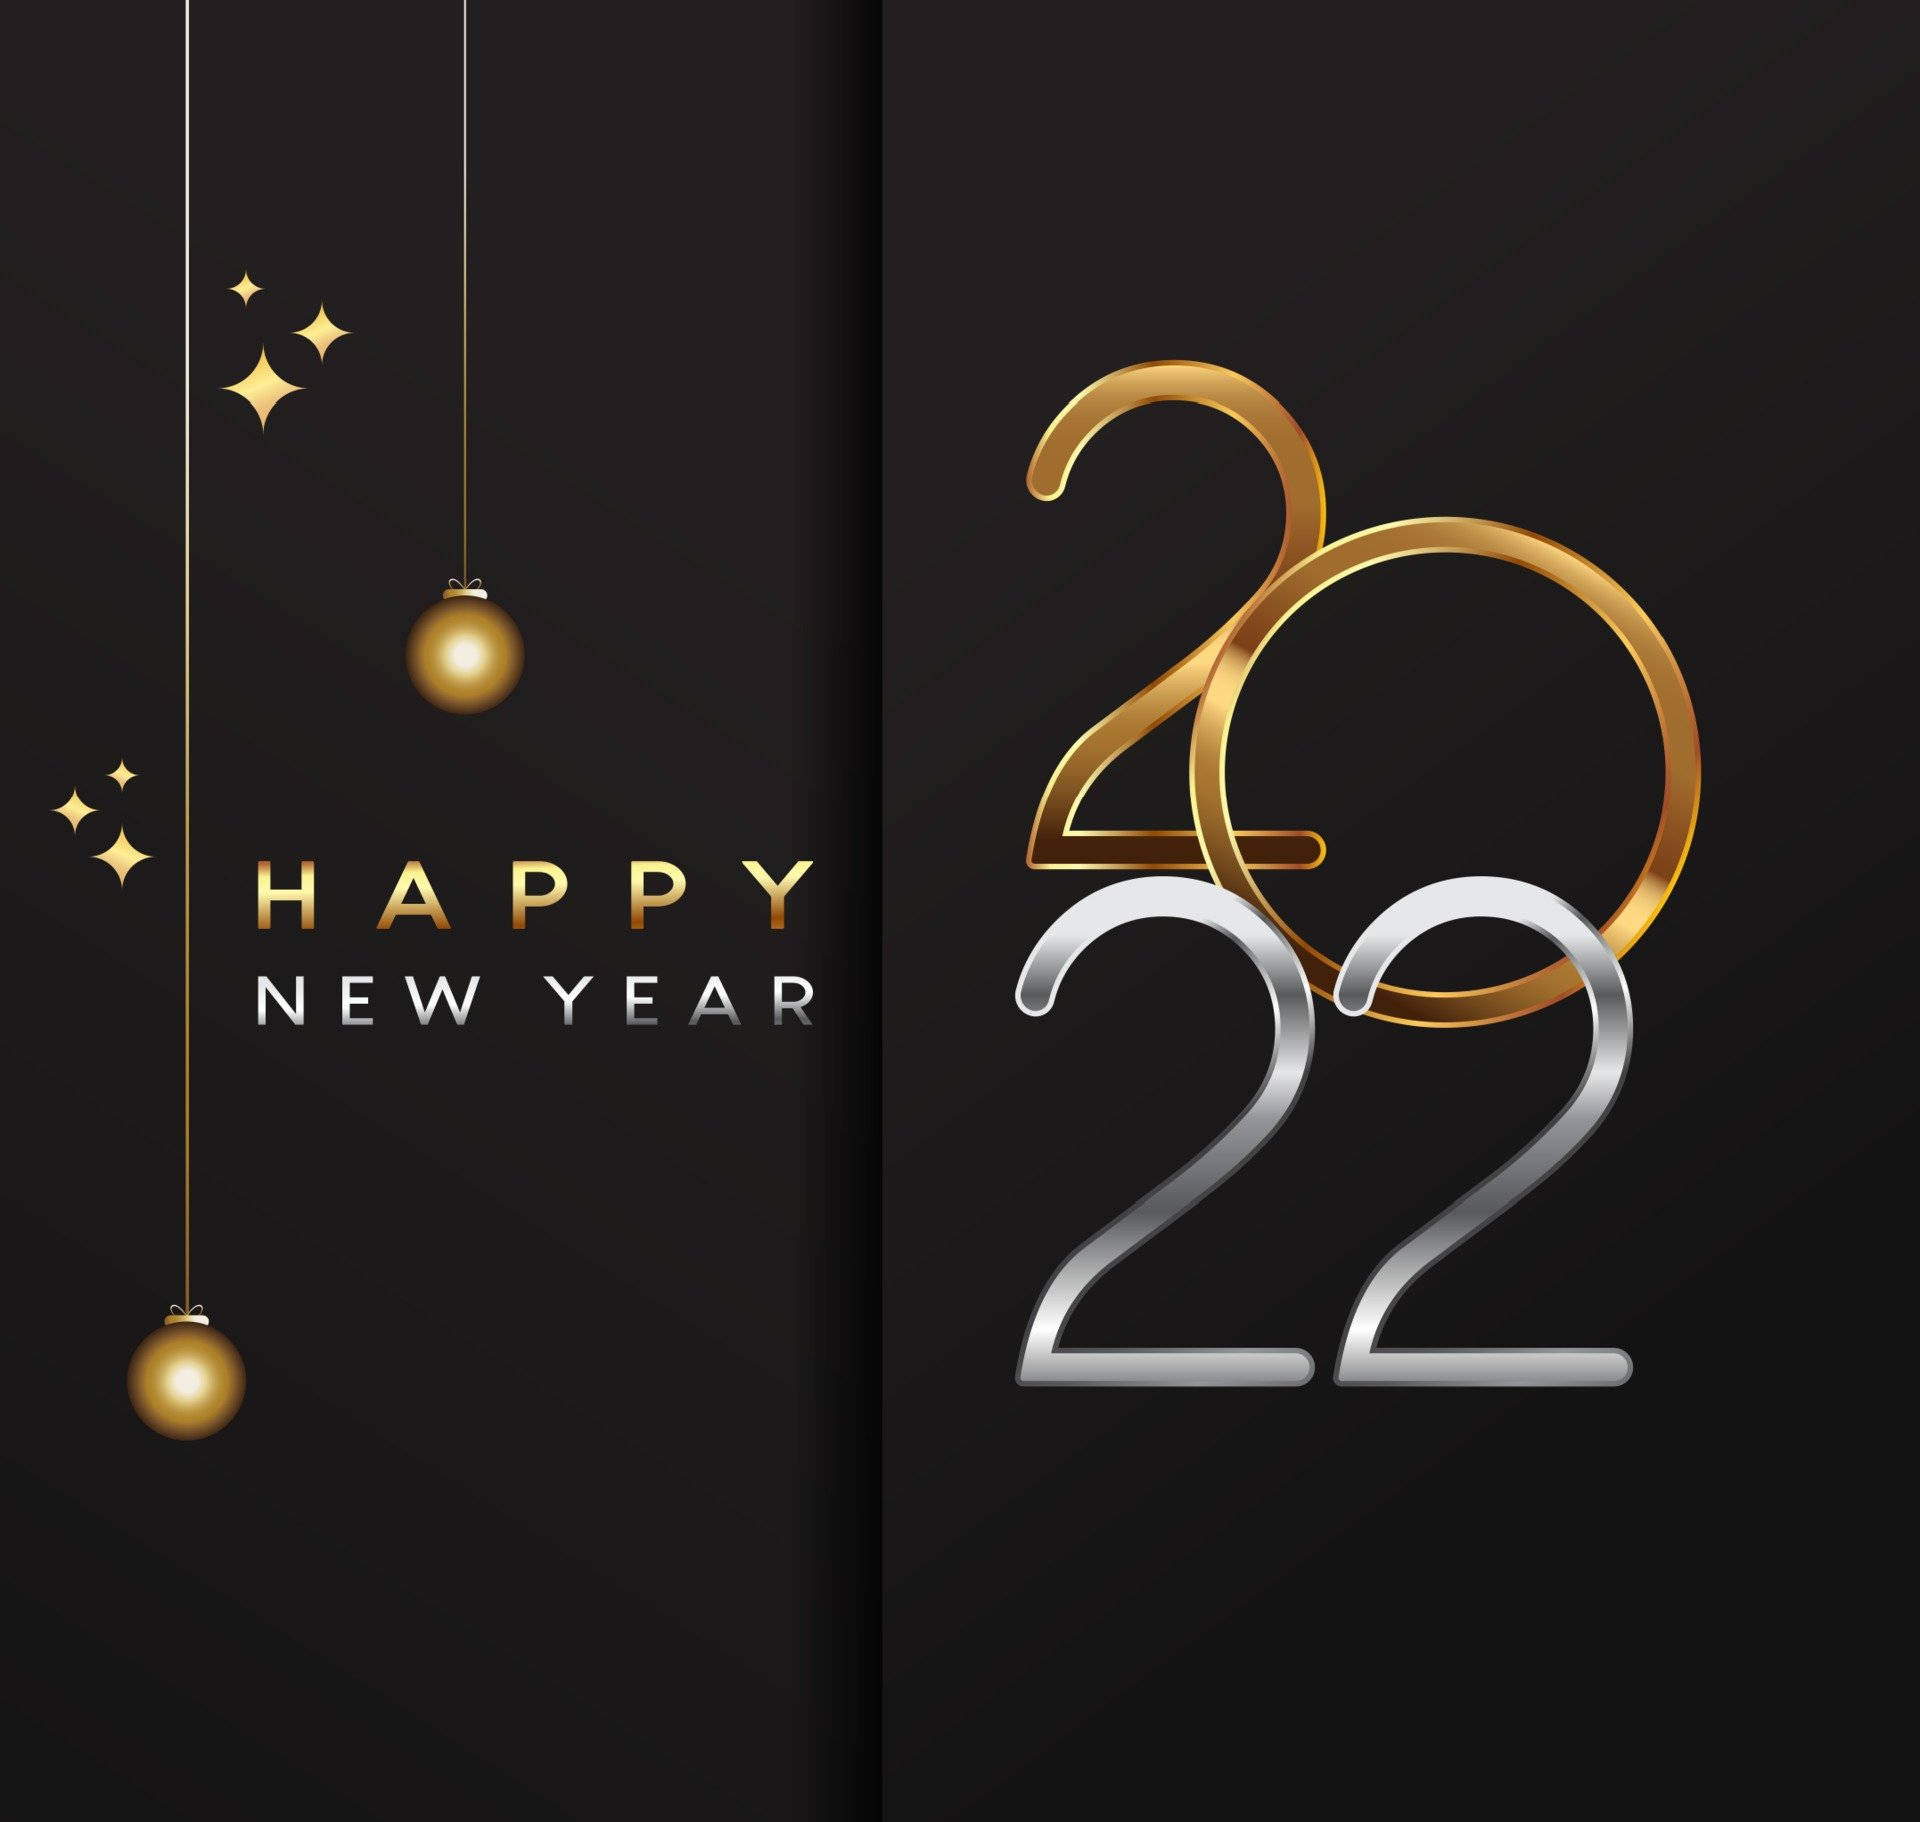 Happy New Year 2022 Black And Gold Background